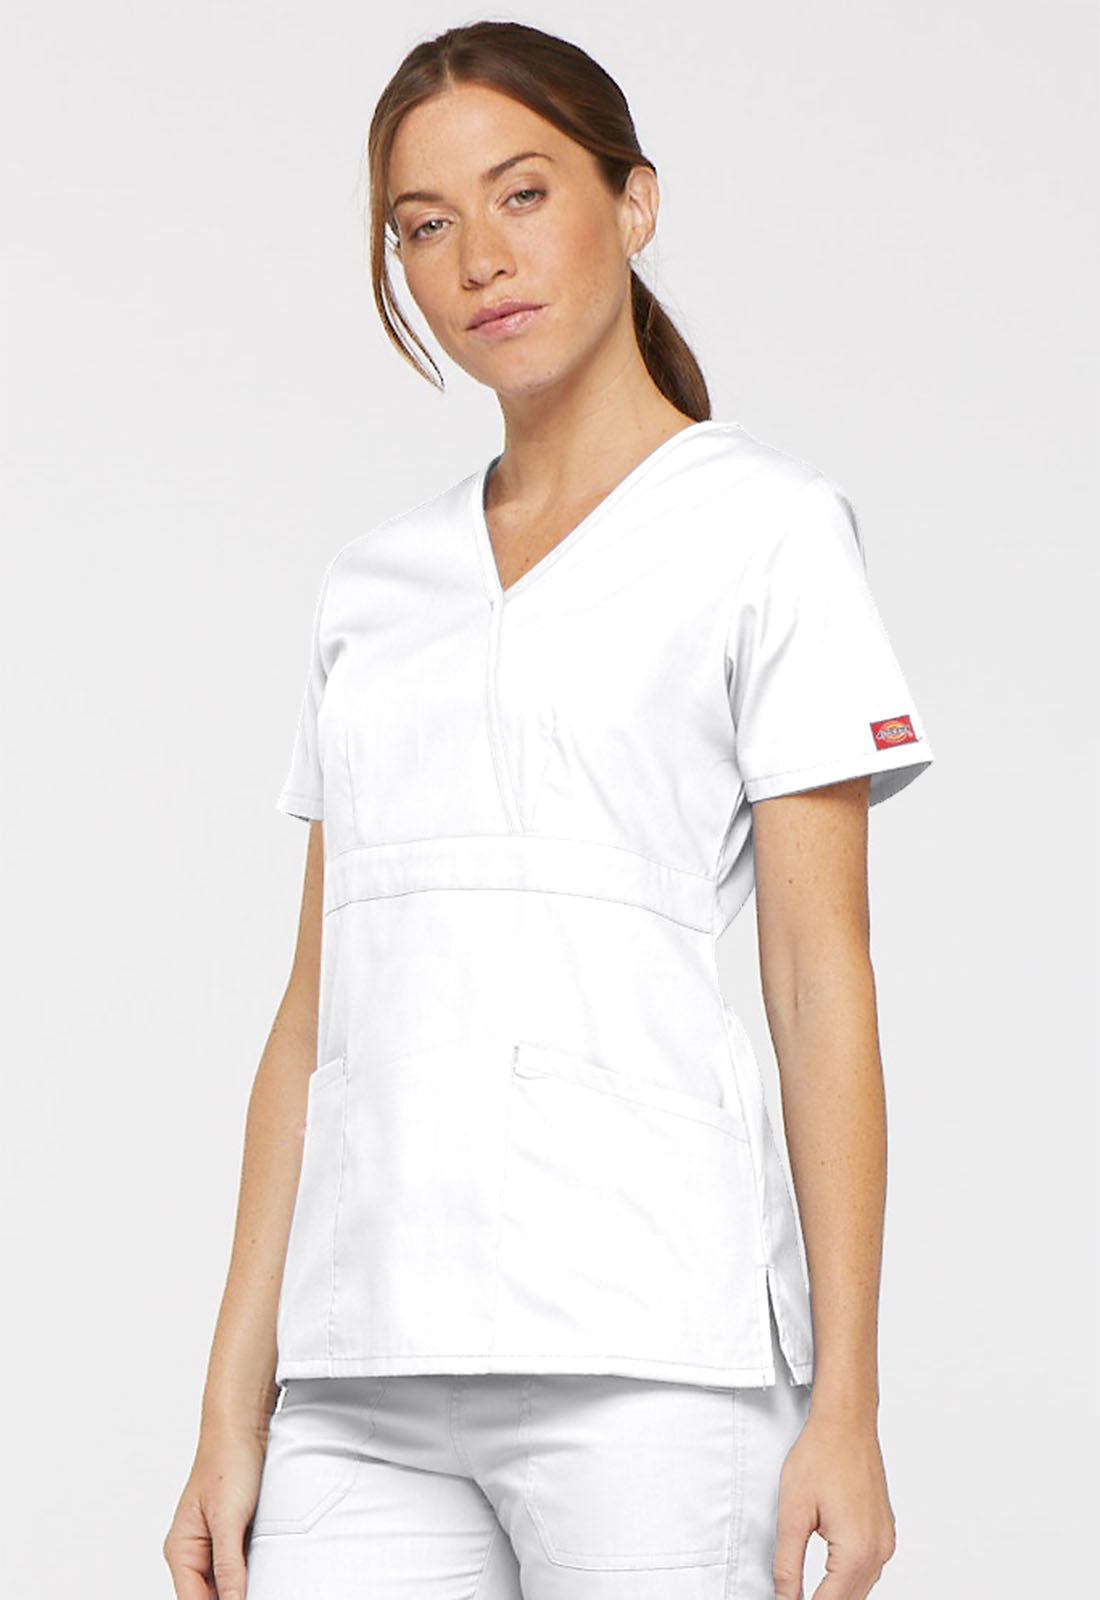 Exist. Conjunto Mujer Dickies EDS Signature Mod.86806/86106 White